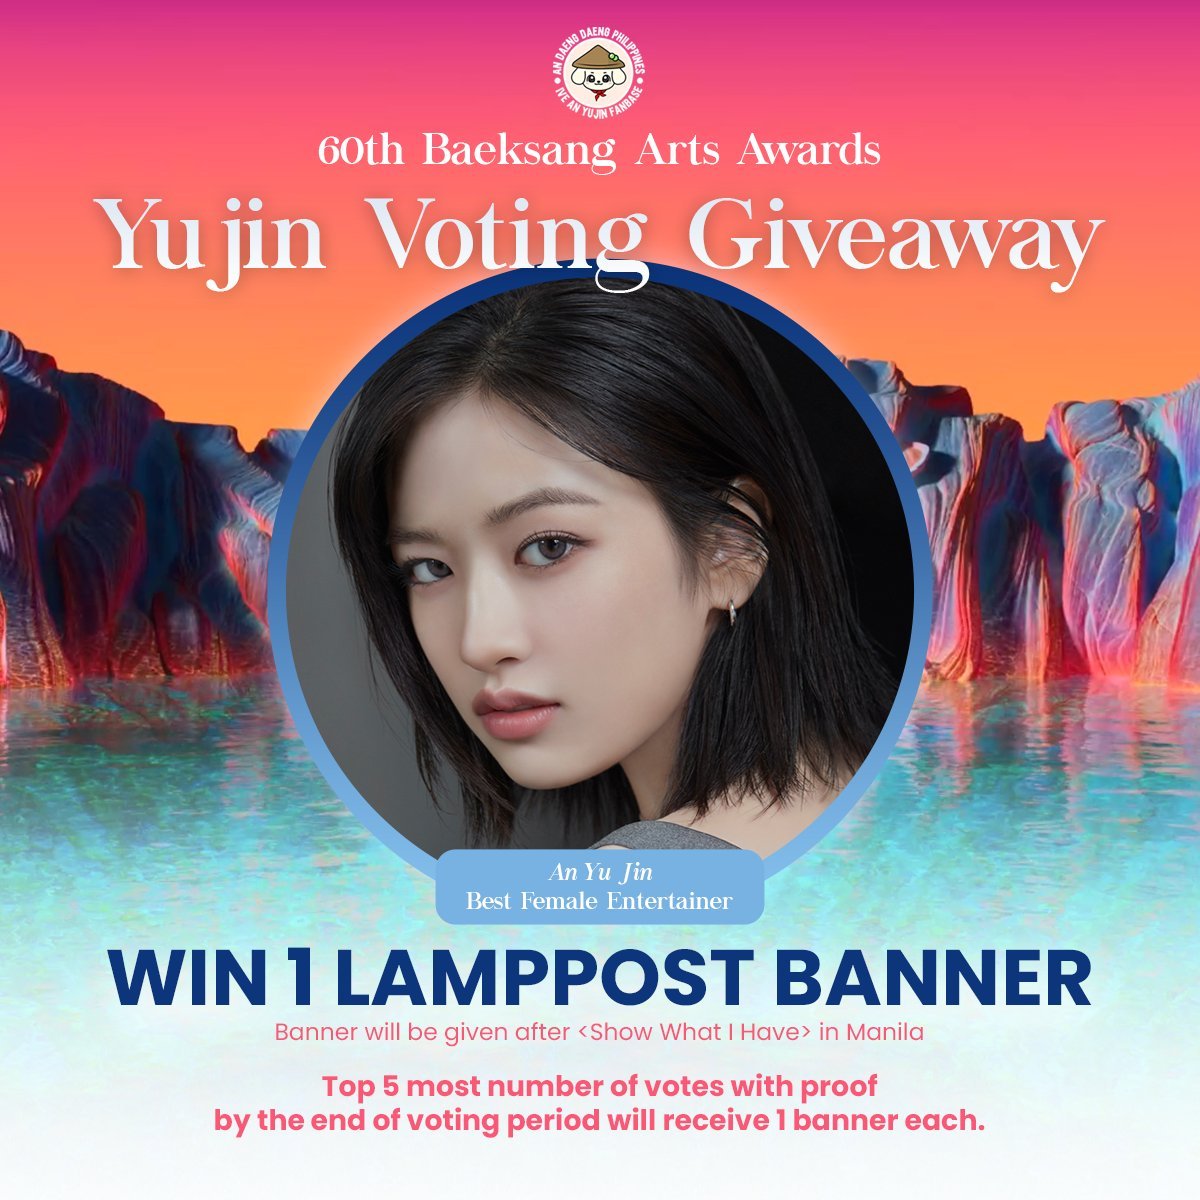 [GIVEAWAY]

Get a chance to win a lamp post banner by voting Yujin in the 60th Baeksang Popularity Awards!

Top 5 most number of votes with proof by the end of the voting period will receive 1 banner each. Make sure to watermark your proofs and reply to this tweet.

Check the